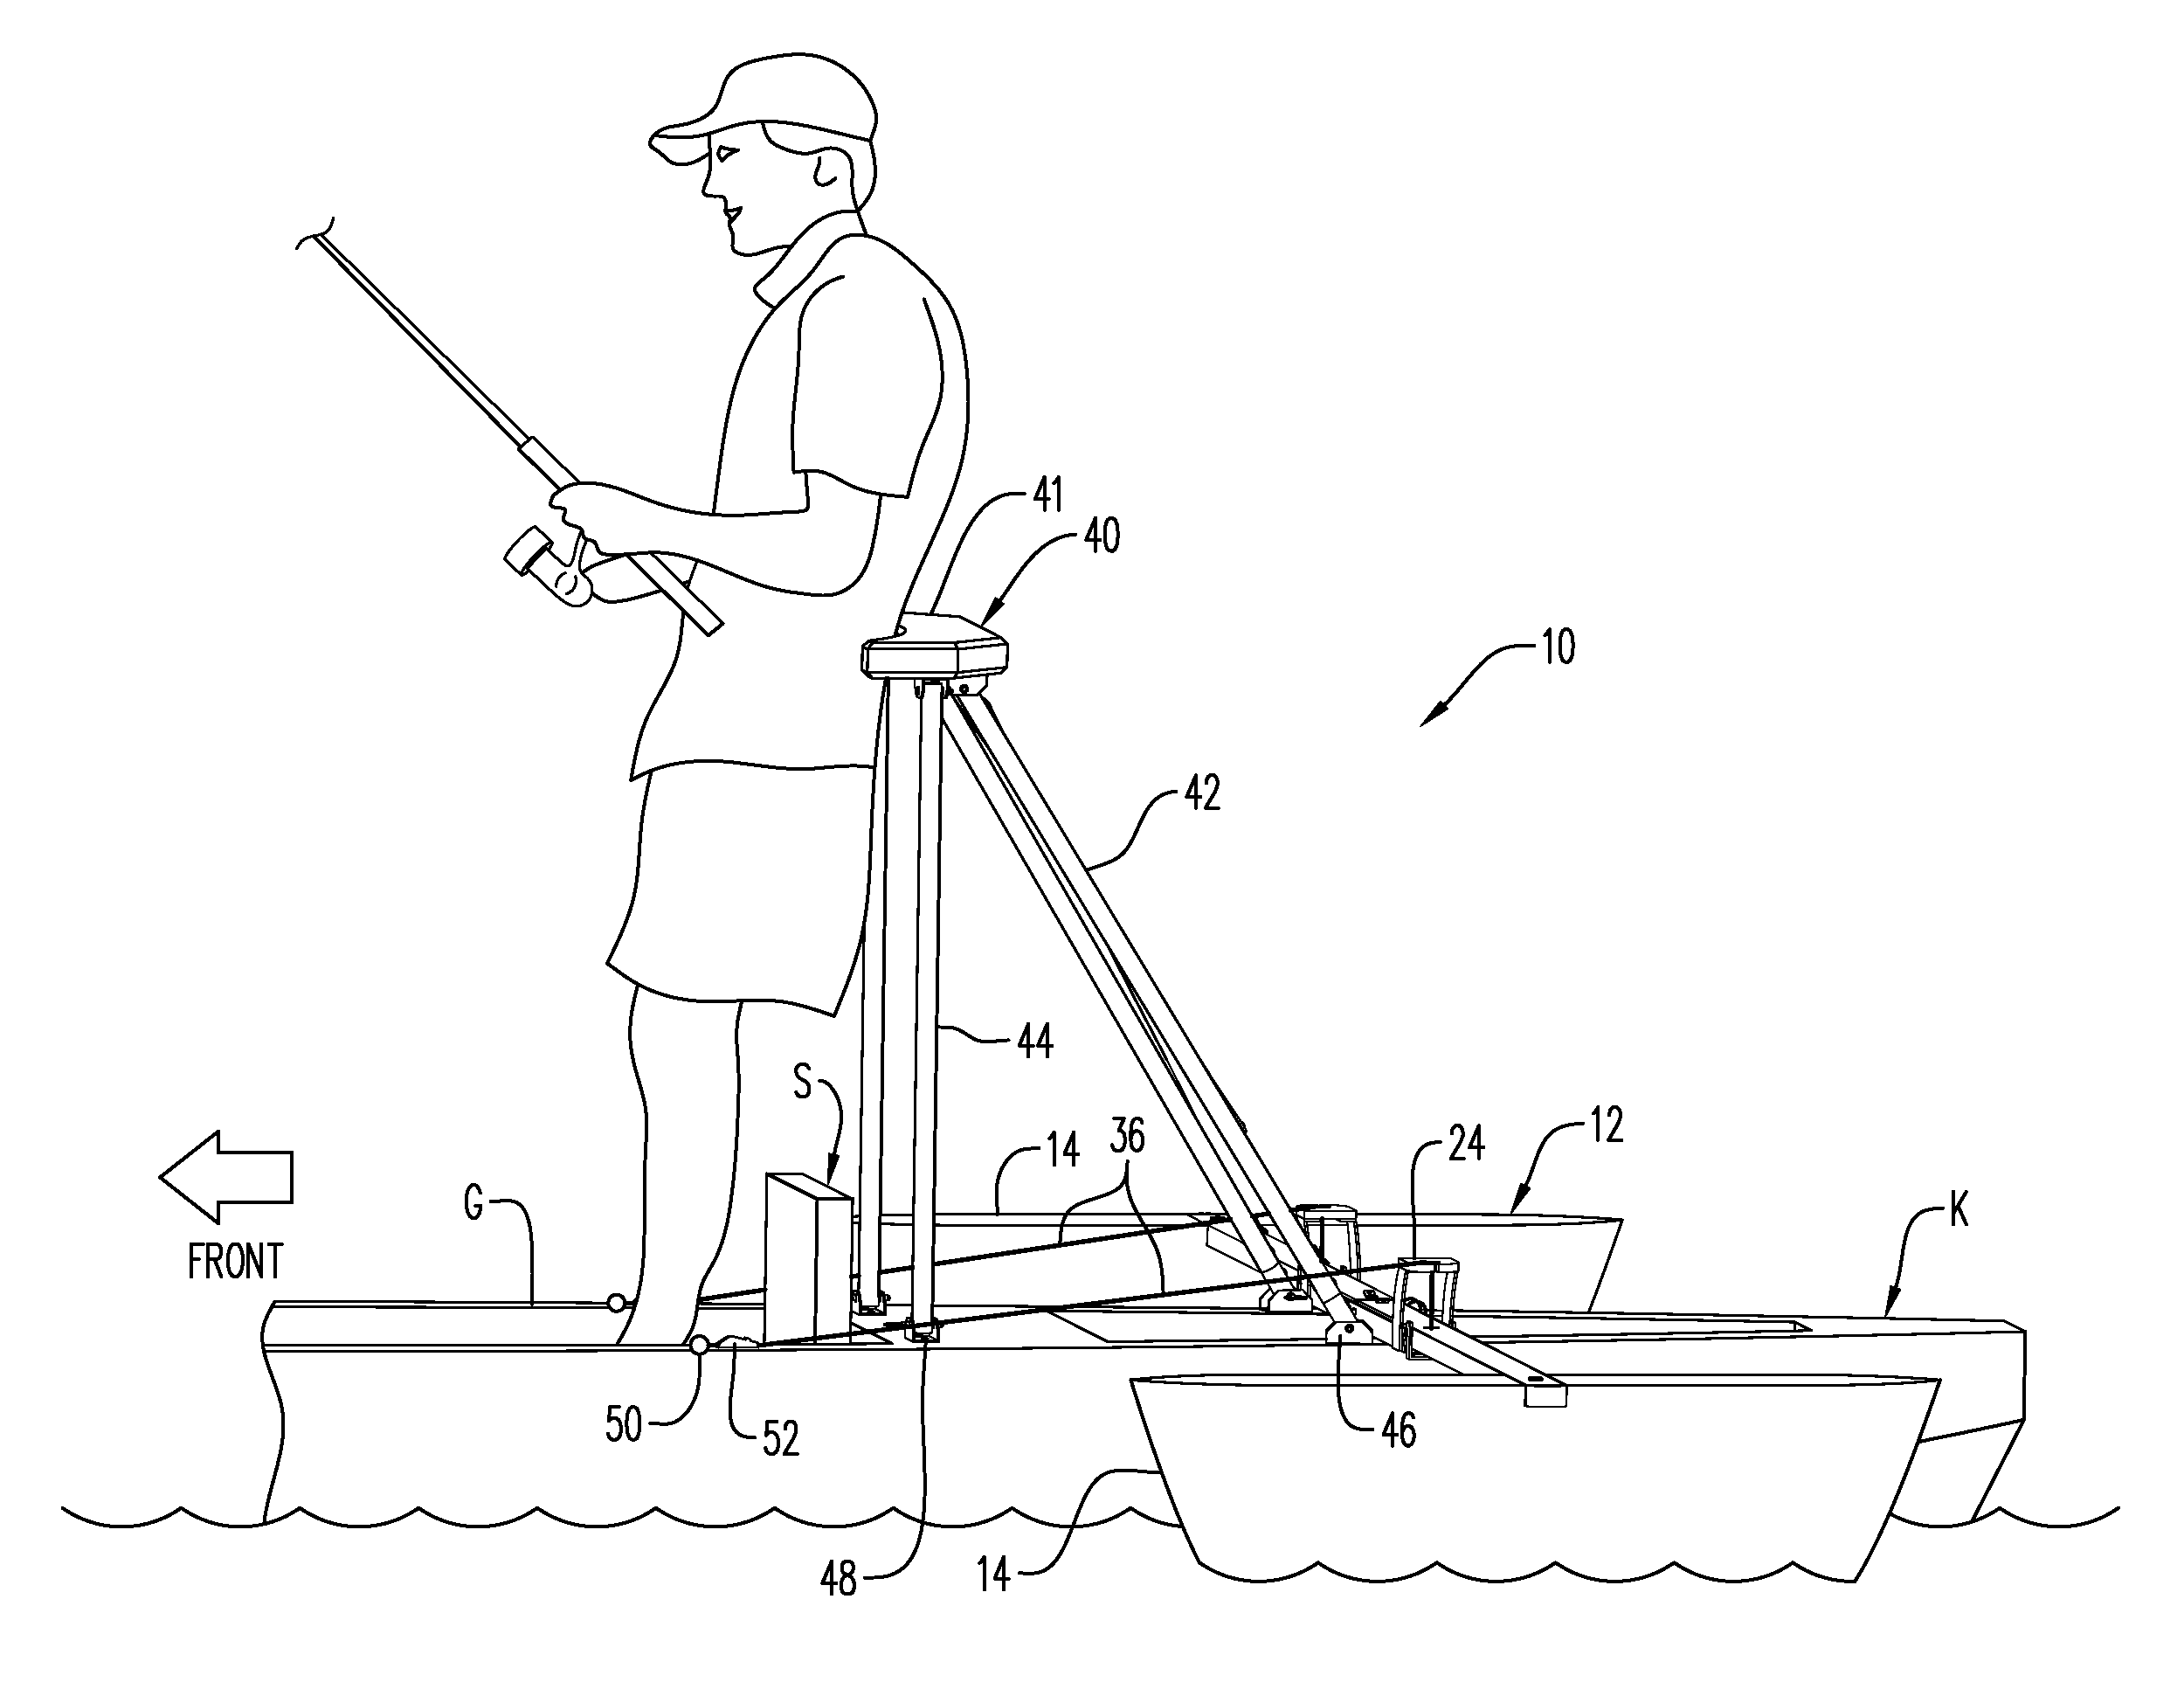 Stabilizer and standing support for a kayak or canoe